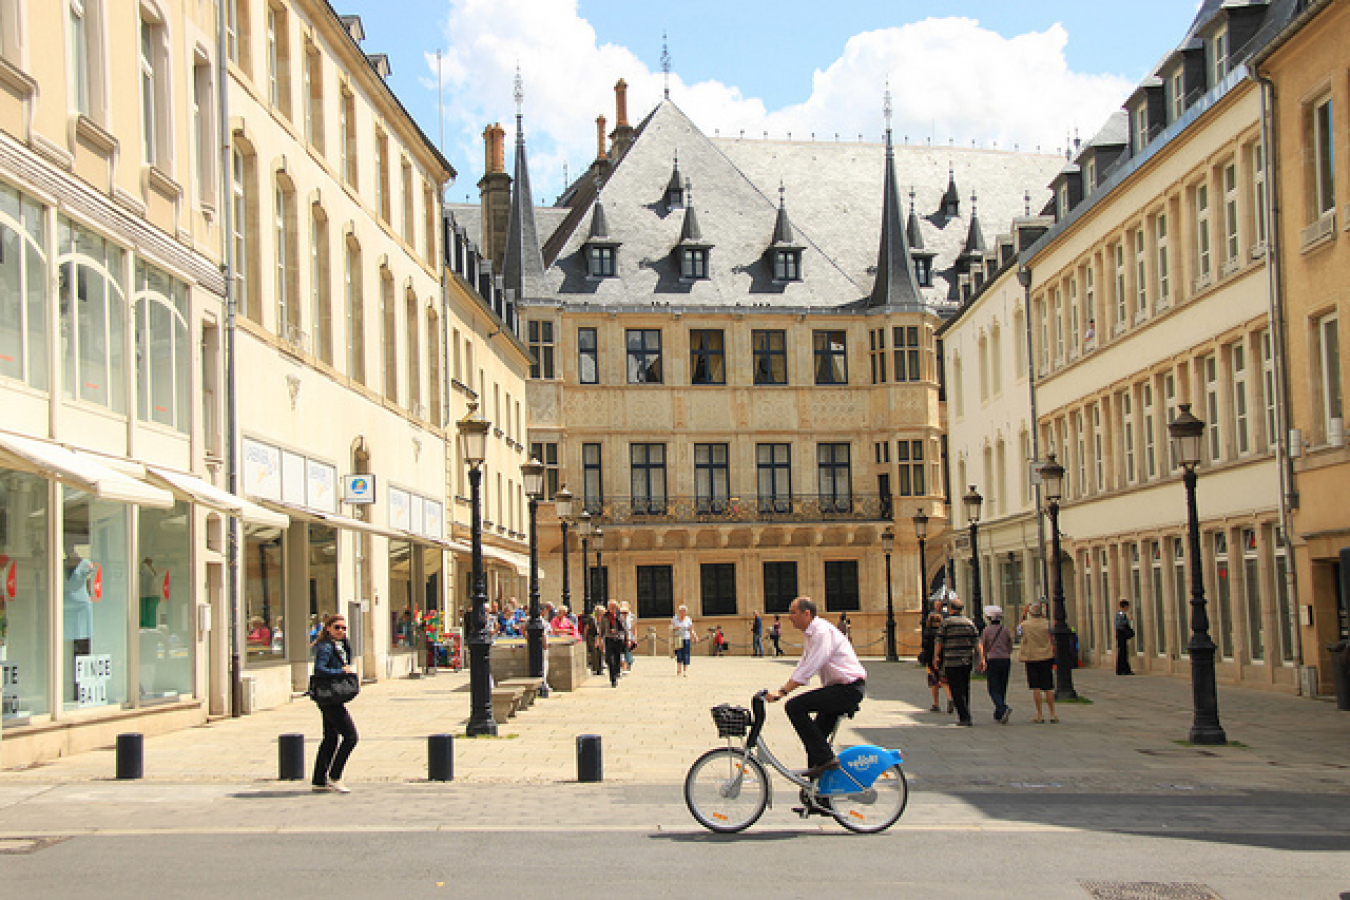 Luxembourg immigration and work visas | Workpermit.com